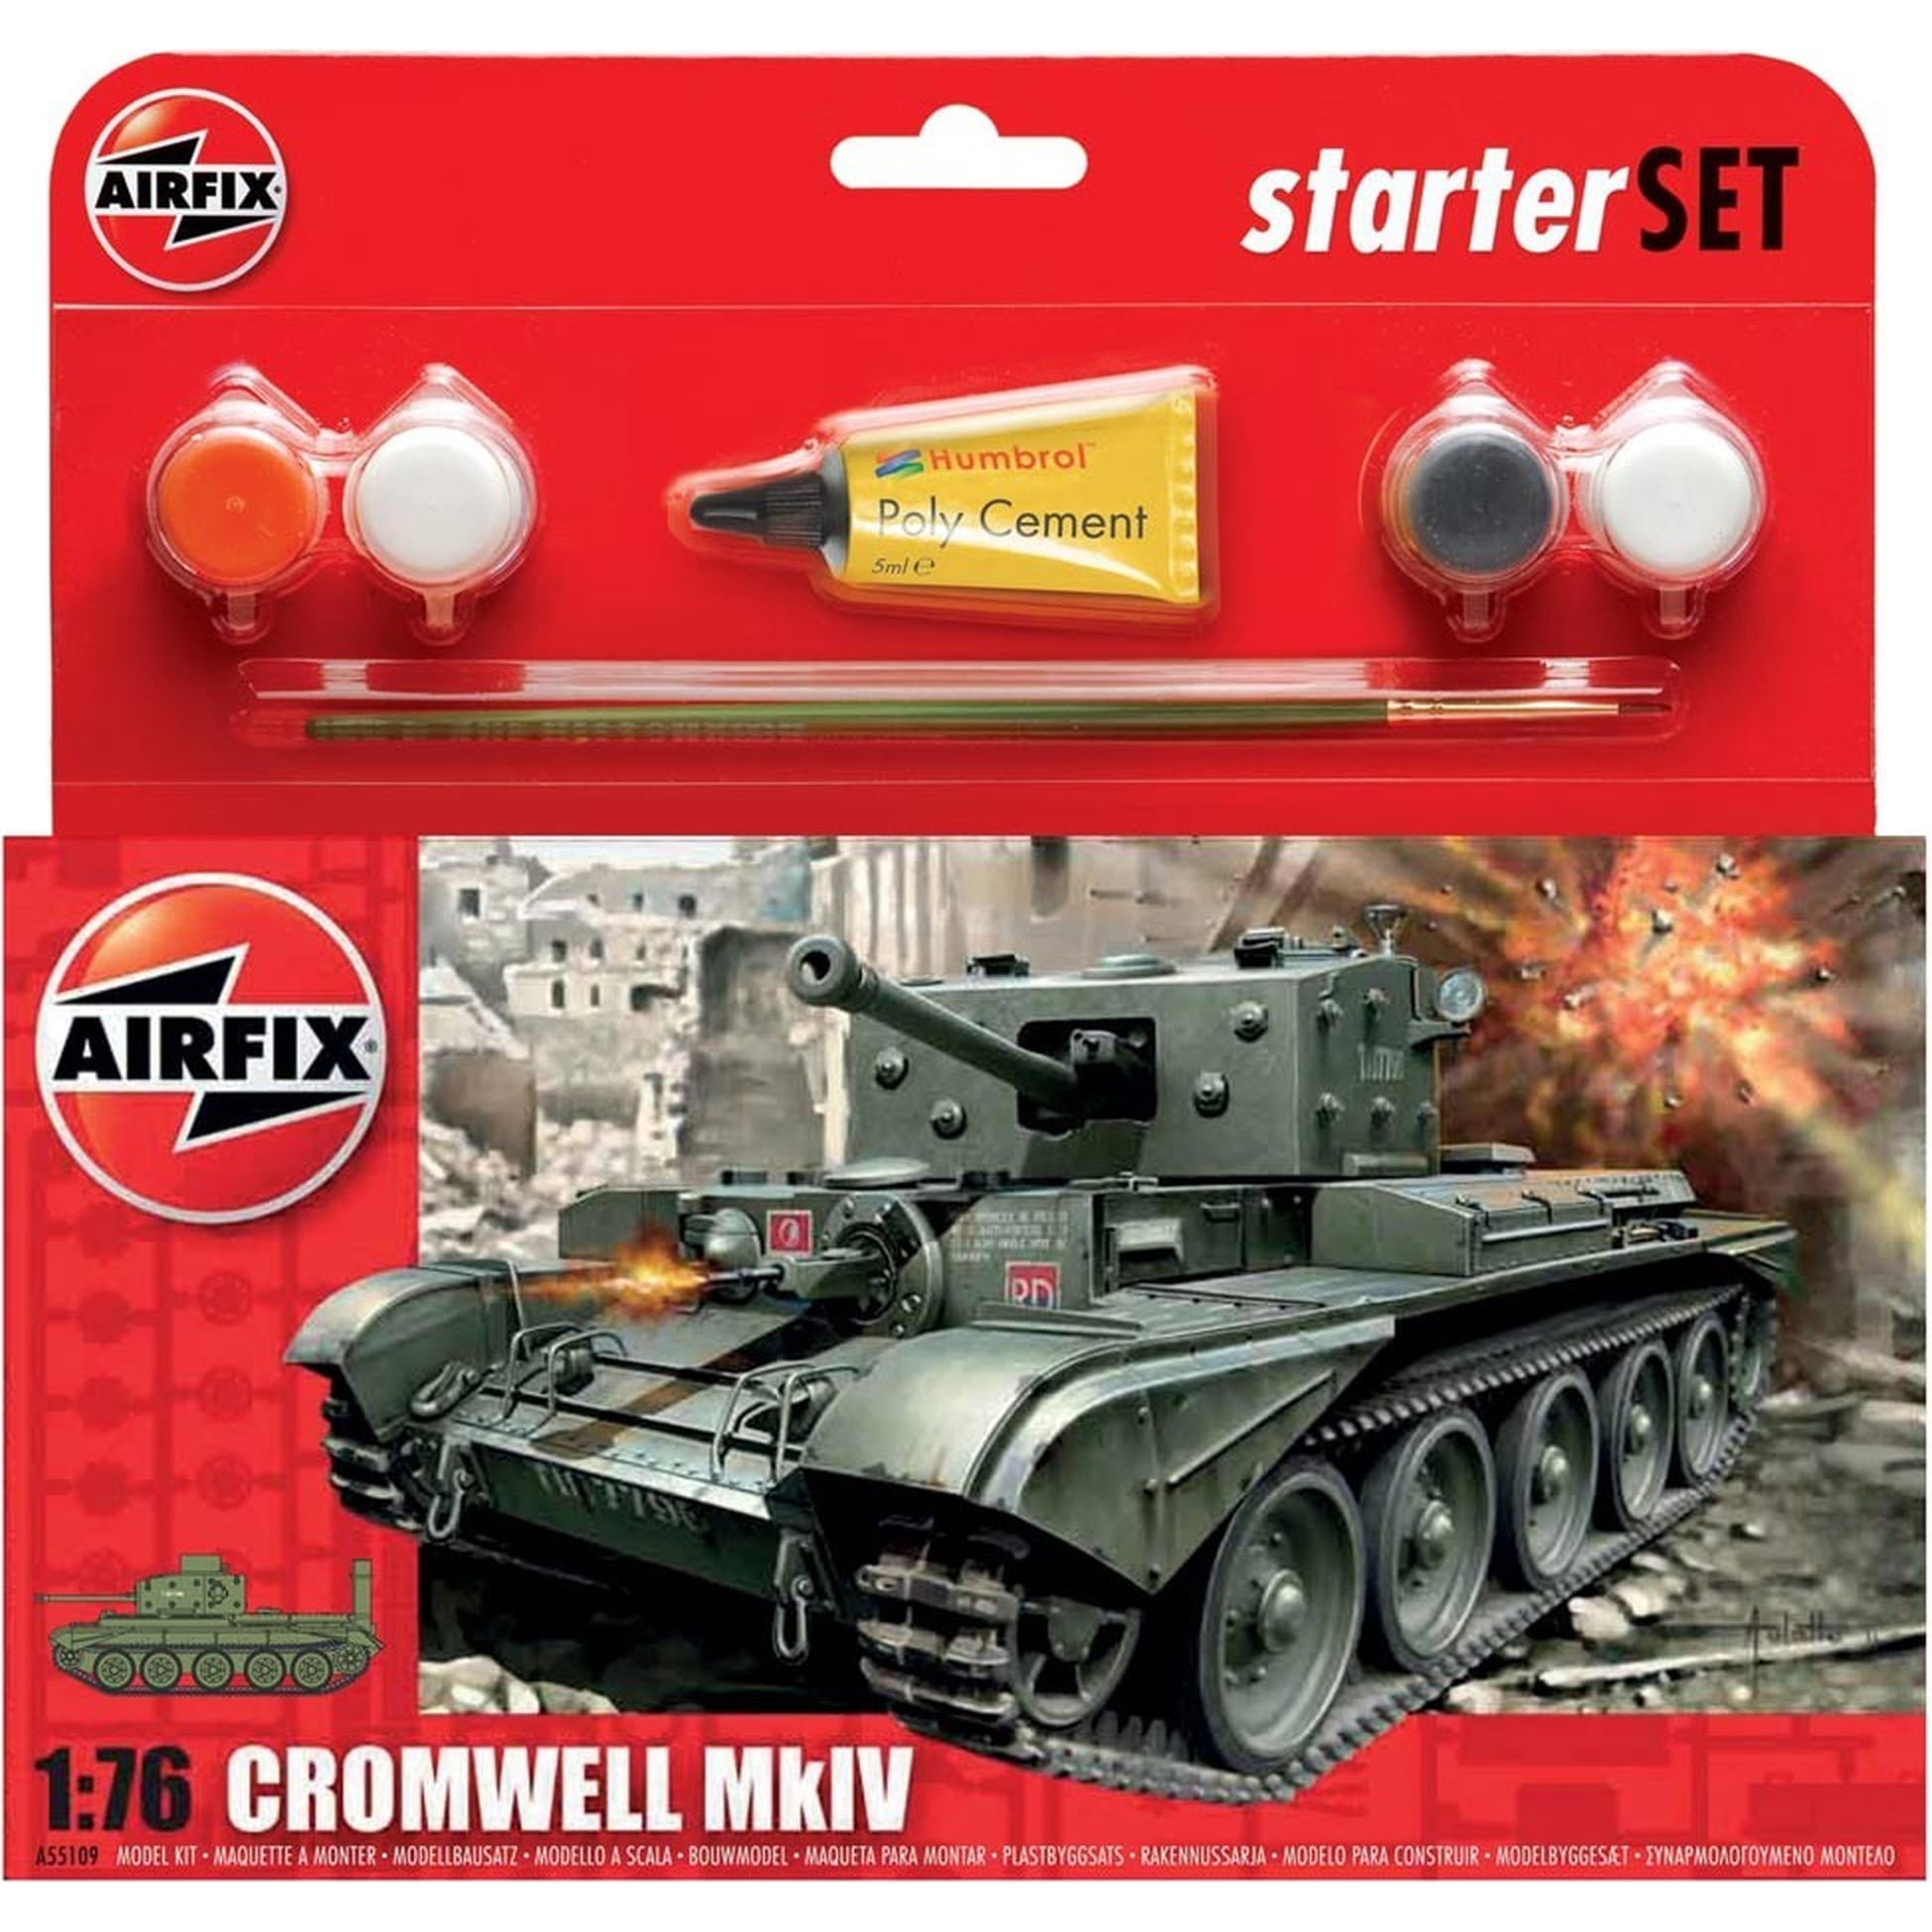 by Airfix 1:76 Scale Airfix Cromwell MkIV Starter Gift Set